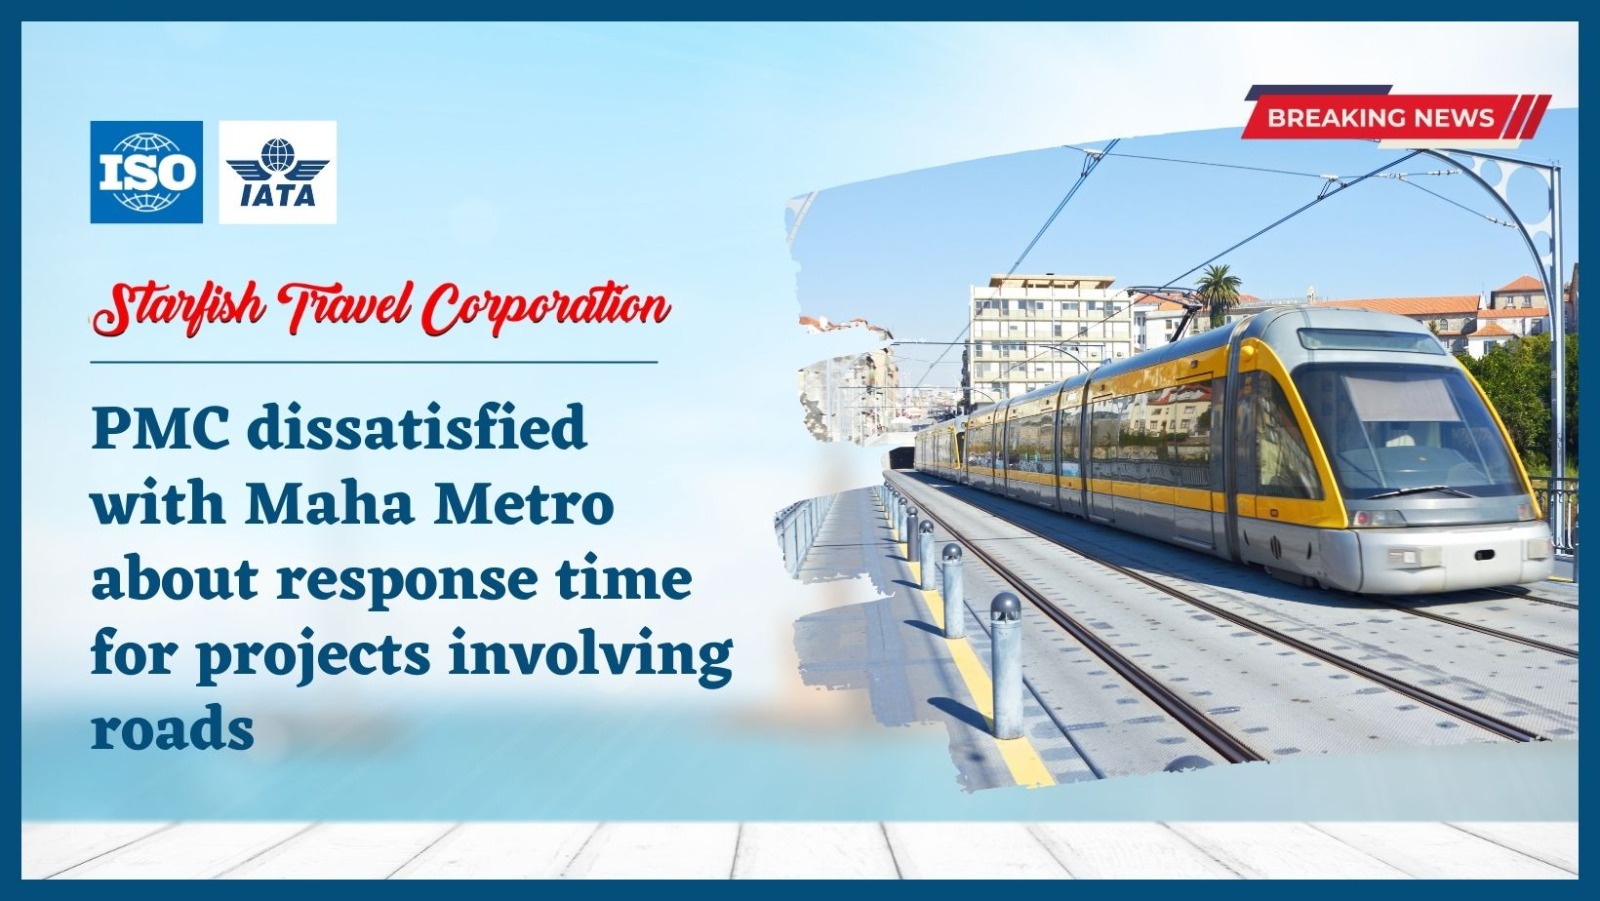 PMC dissatisfied with Maha Metro about response time for projects involving roads